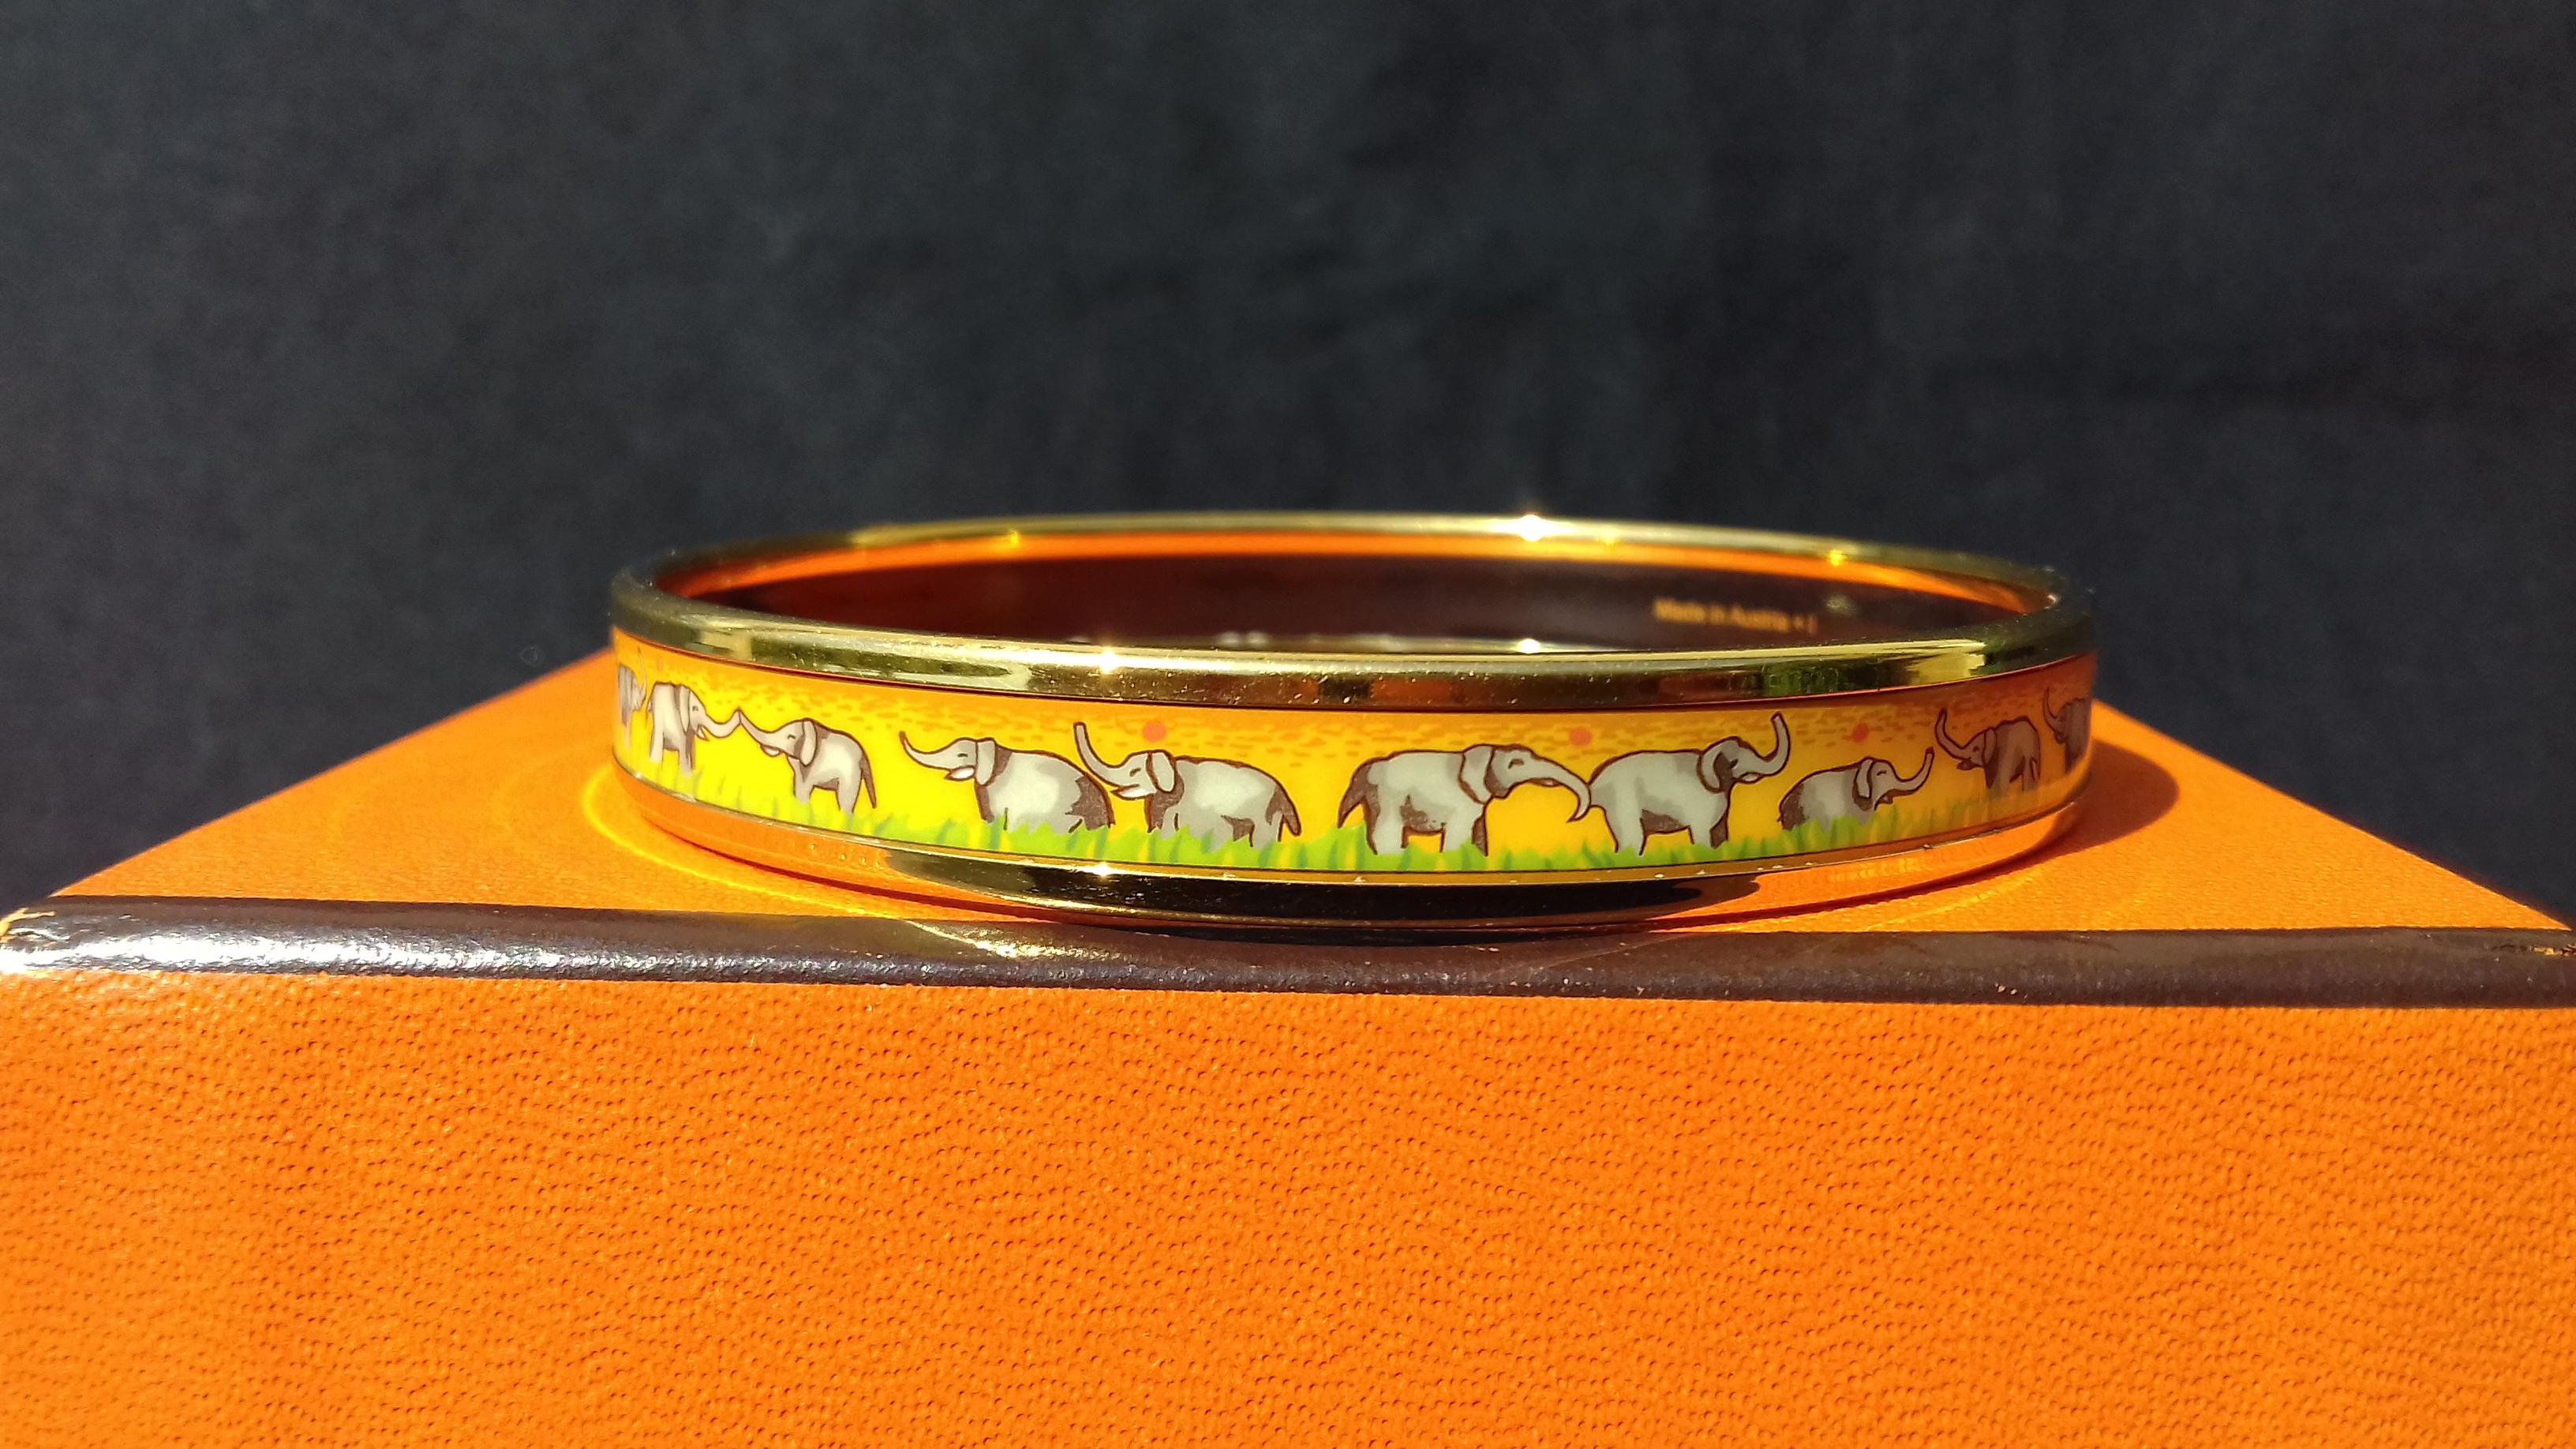 Gorgeous Authentic Hermès Bracelet

Pattern: Elephants Grazing

Hard to find ! One of the most thought after Hermès Bracelet

Made in Austria + I 

Made of printed Enamel and Gold Plated Hardware

Colorways: Yellow background with discreet Pink